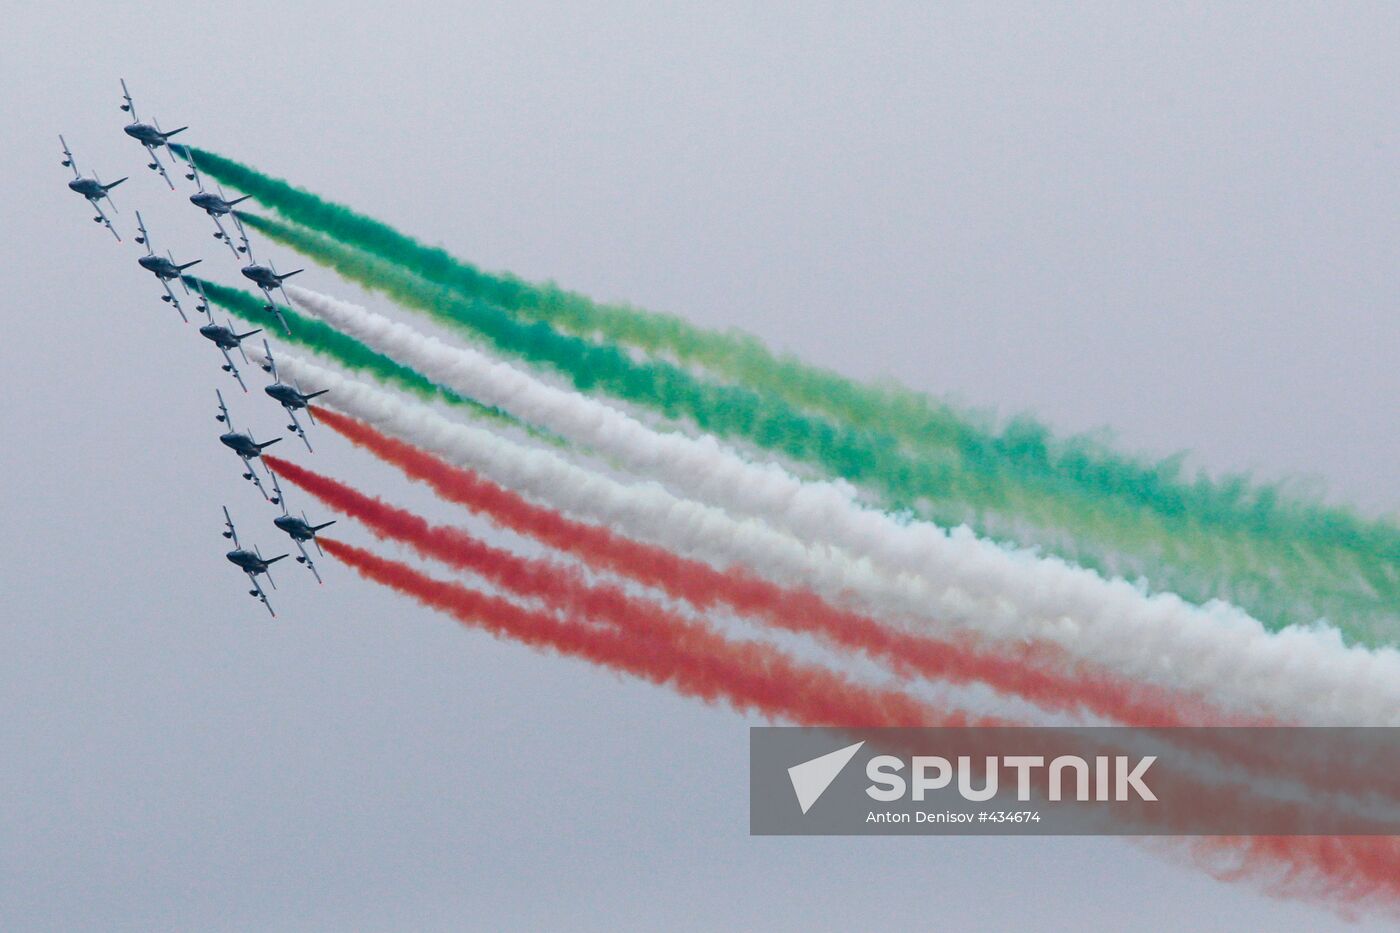 Frecce Tricolori performing on MAKS-2009 air show's closing day